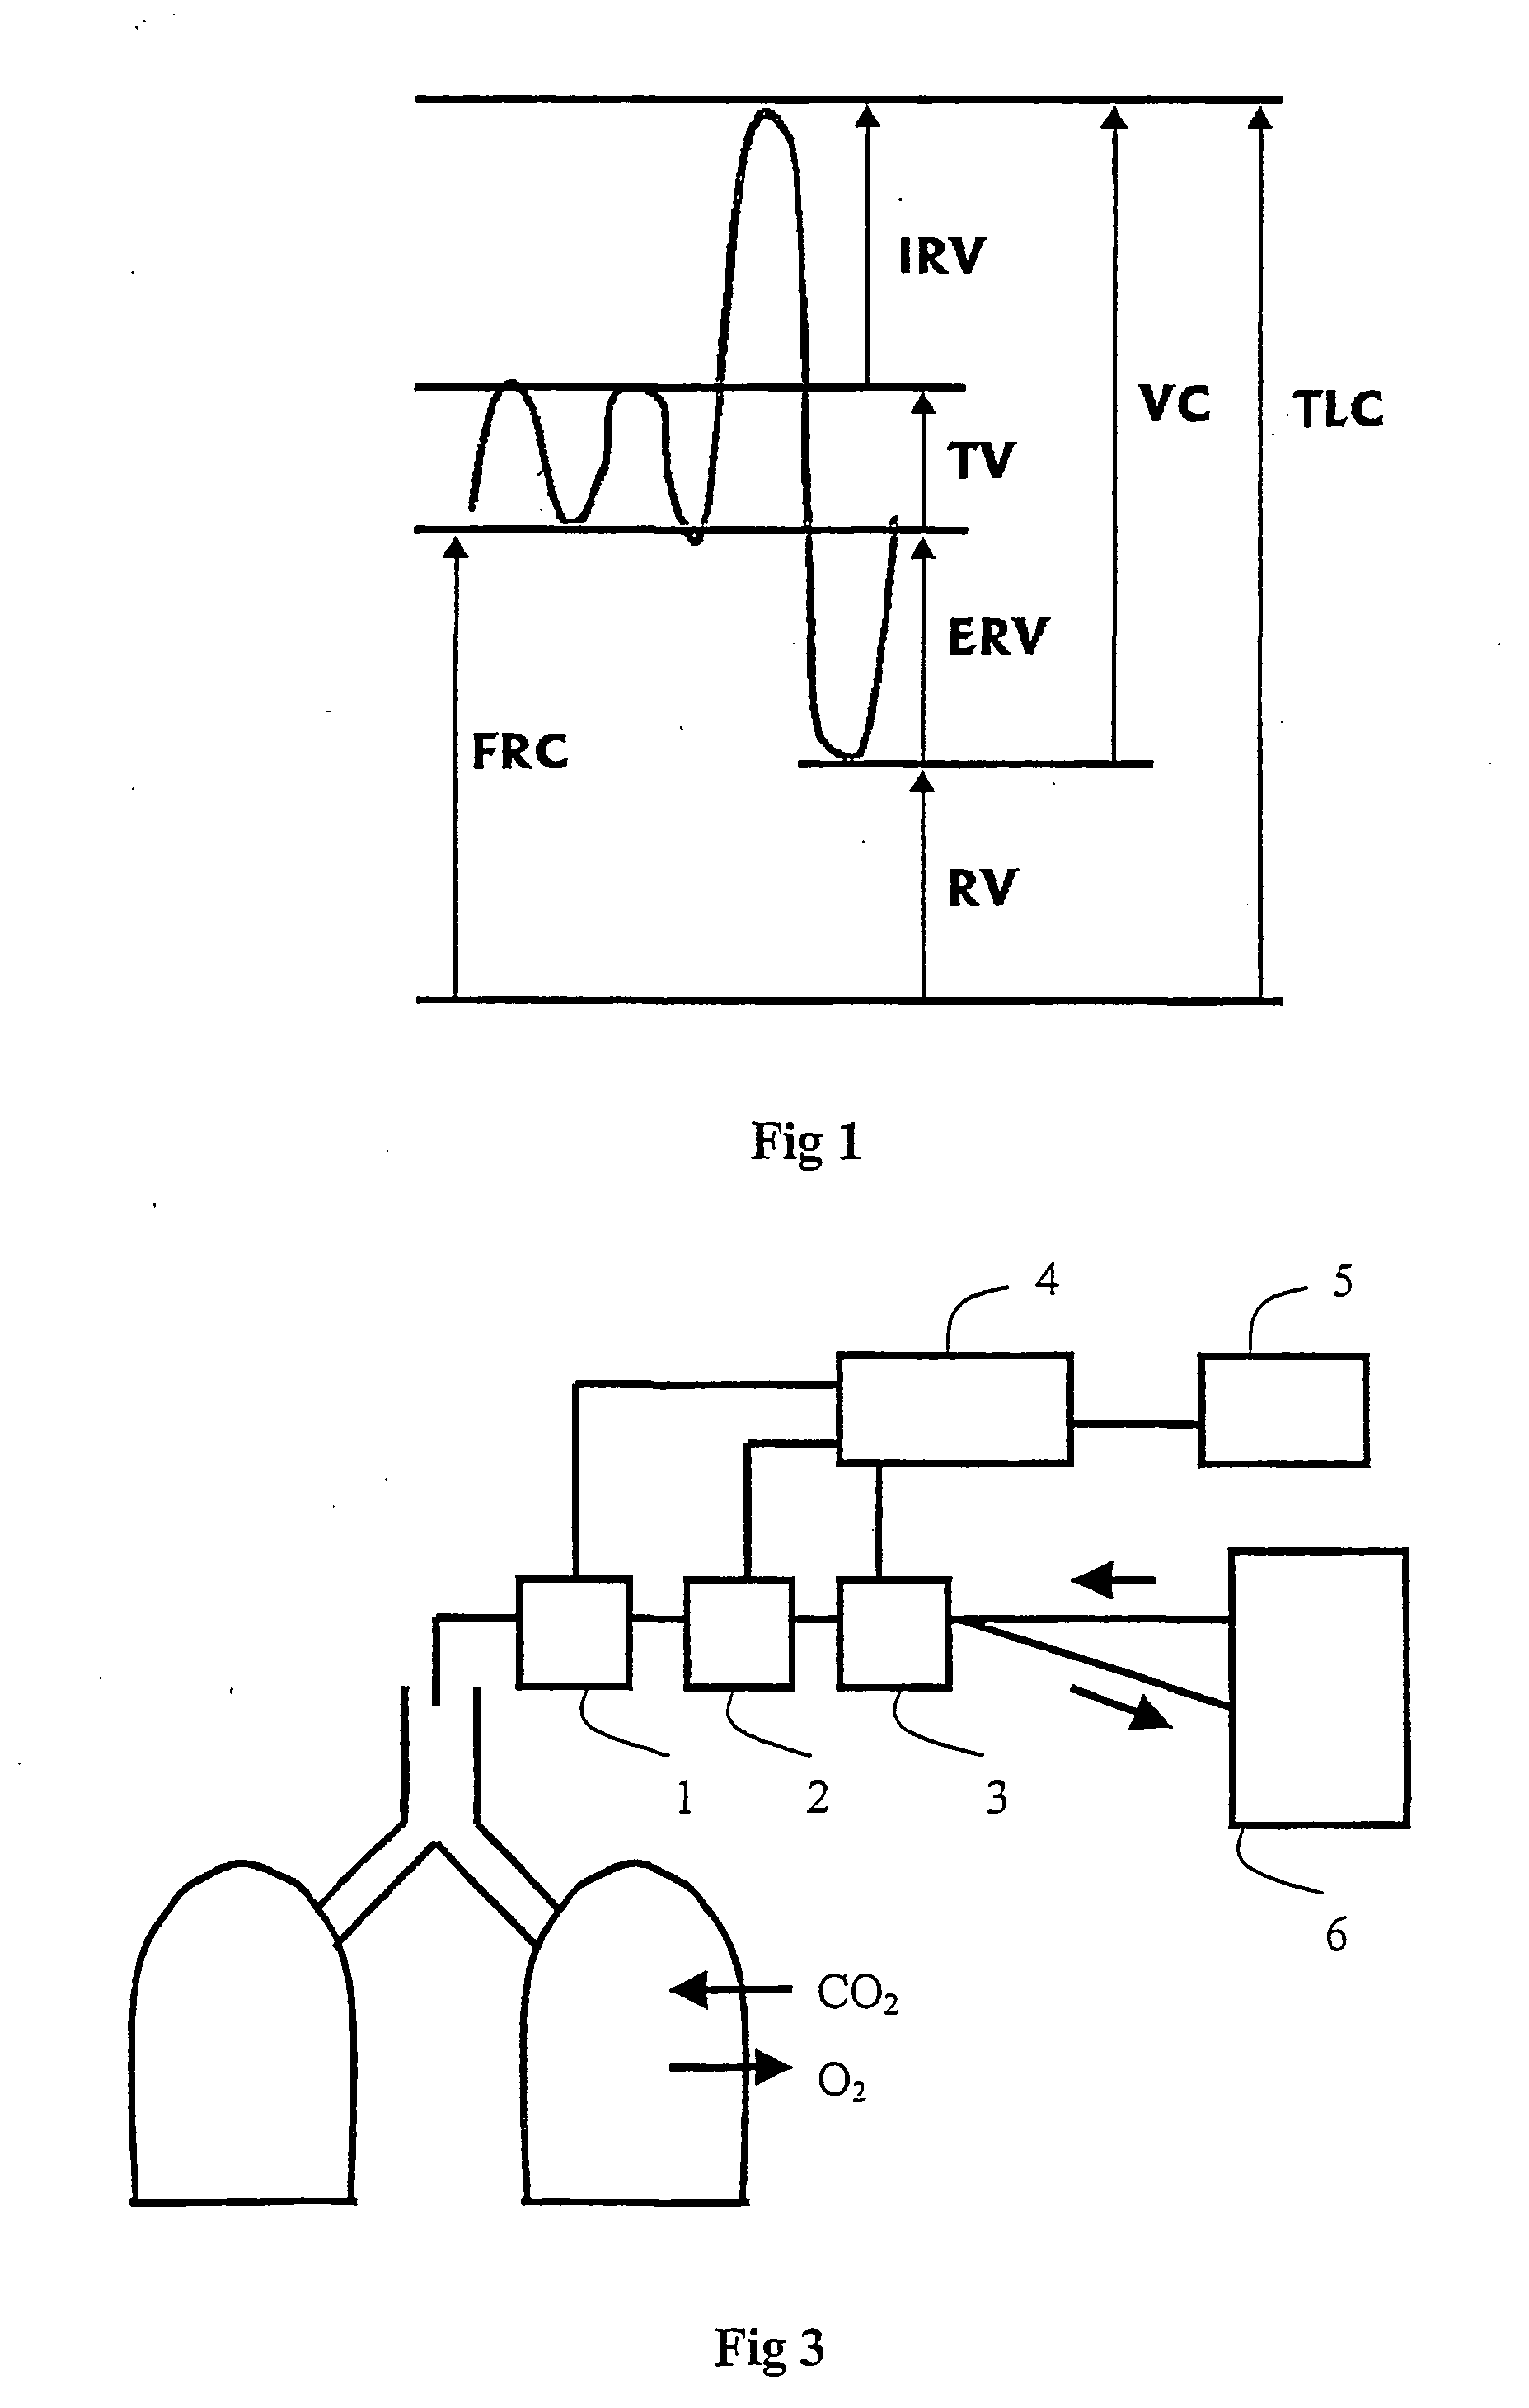 Method and apparatus for measuring functional residual capacity (frc) and cardiac output (co)